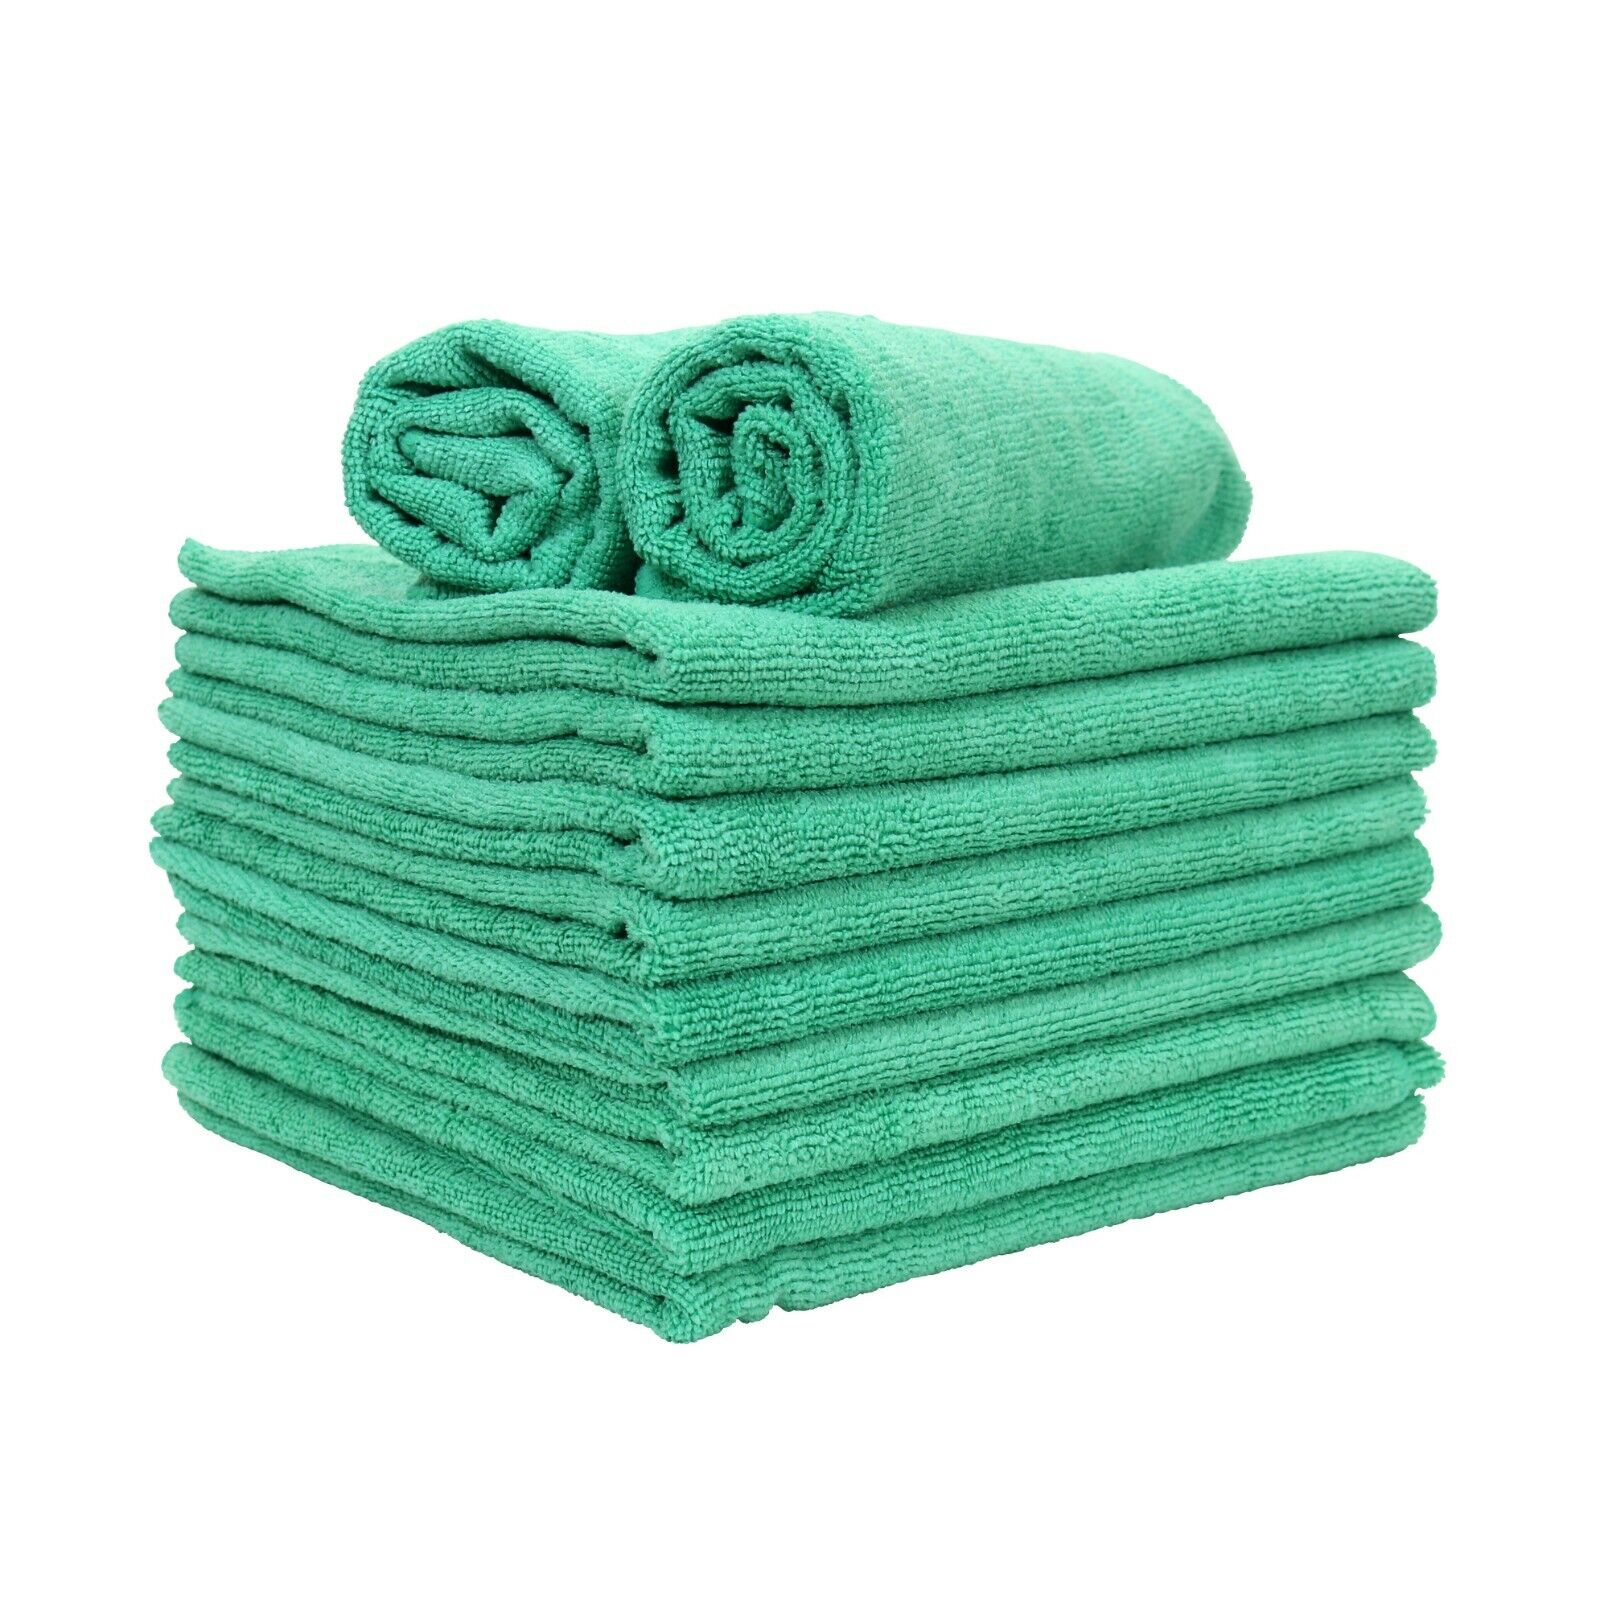 Microfiber Hand Towels 12 Packs - 16 x 27 Soft Reusable Absorbent Color Options Arkwright Does Not Apply - фотография #10